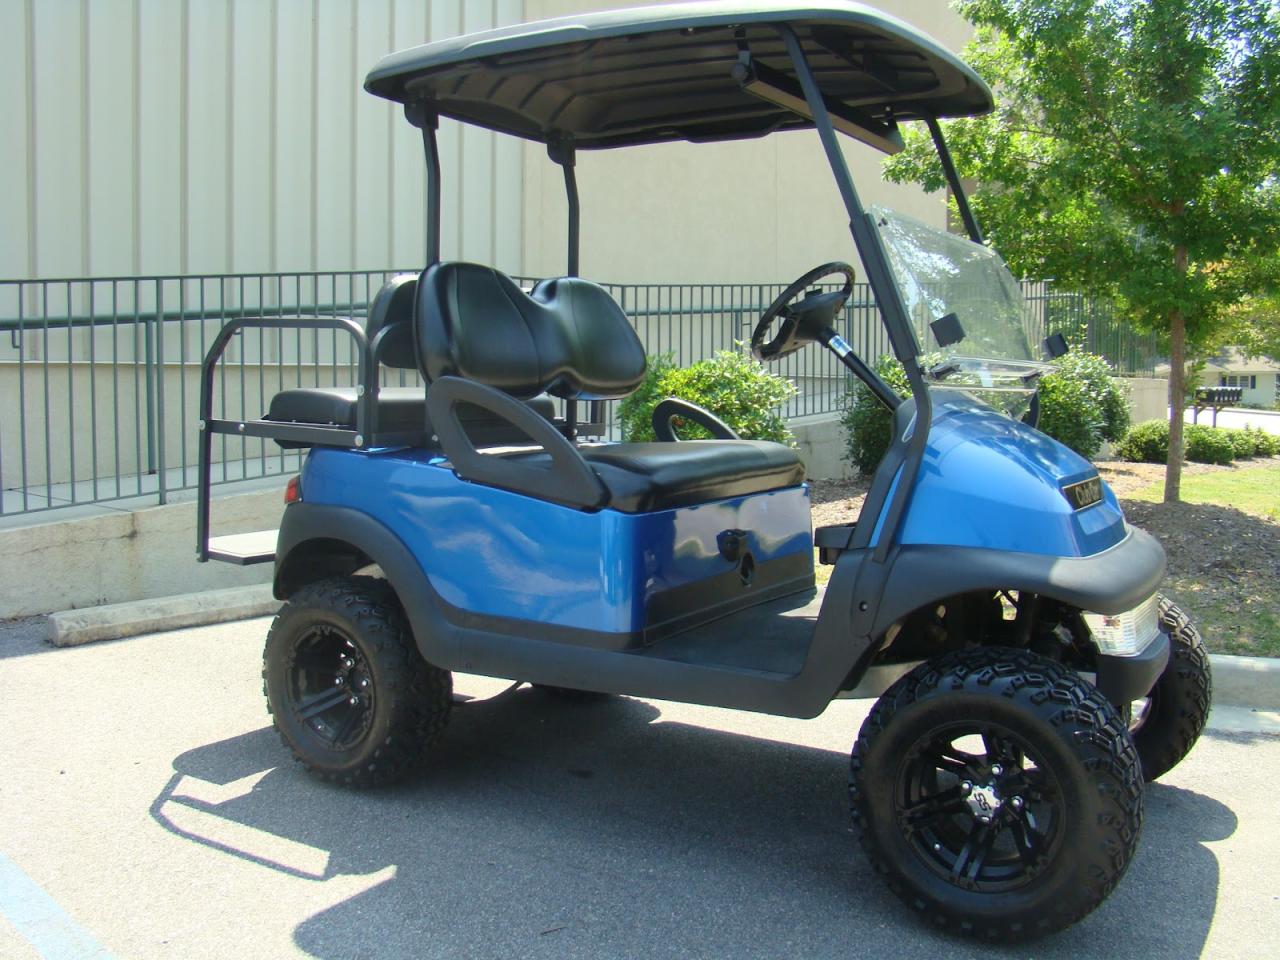 Find Used Golf Carts for Sale by Owner in Washington, Mississippi: Affordable Options Abound